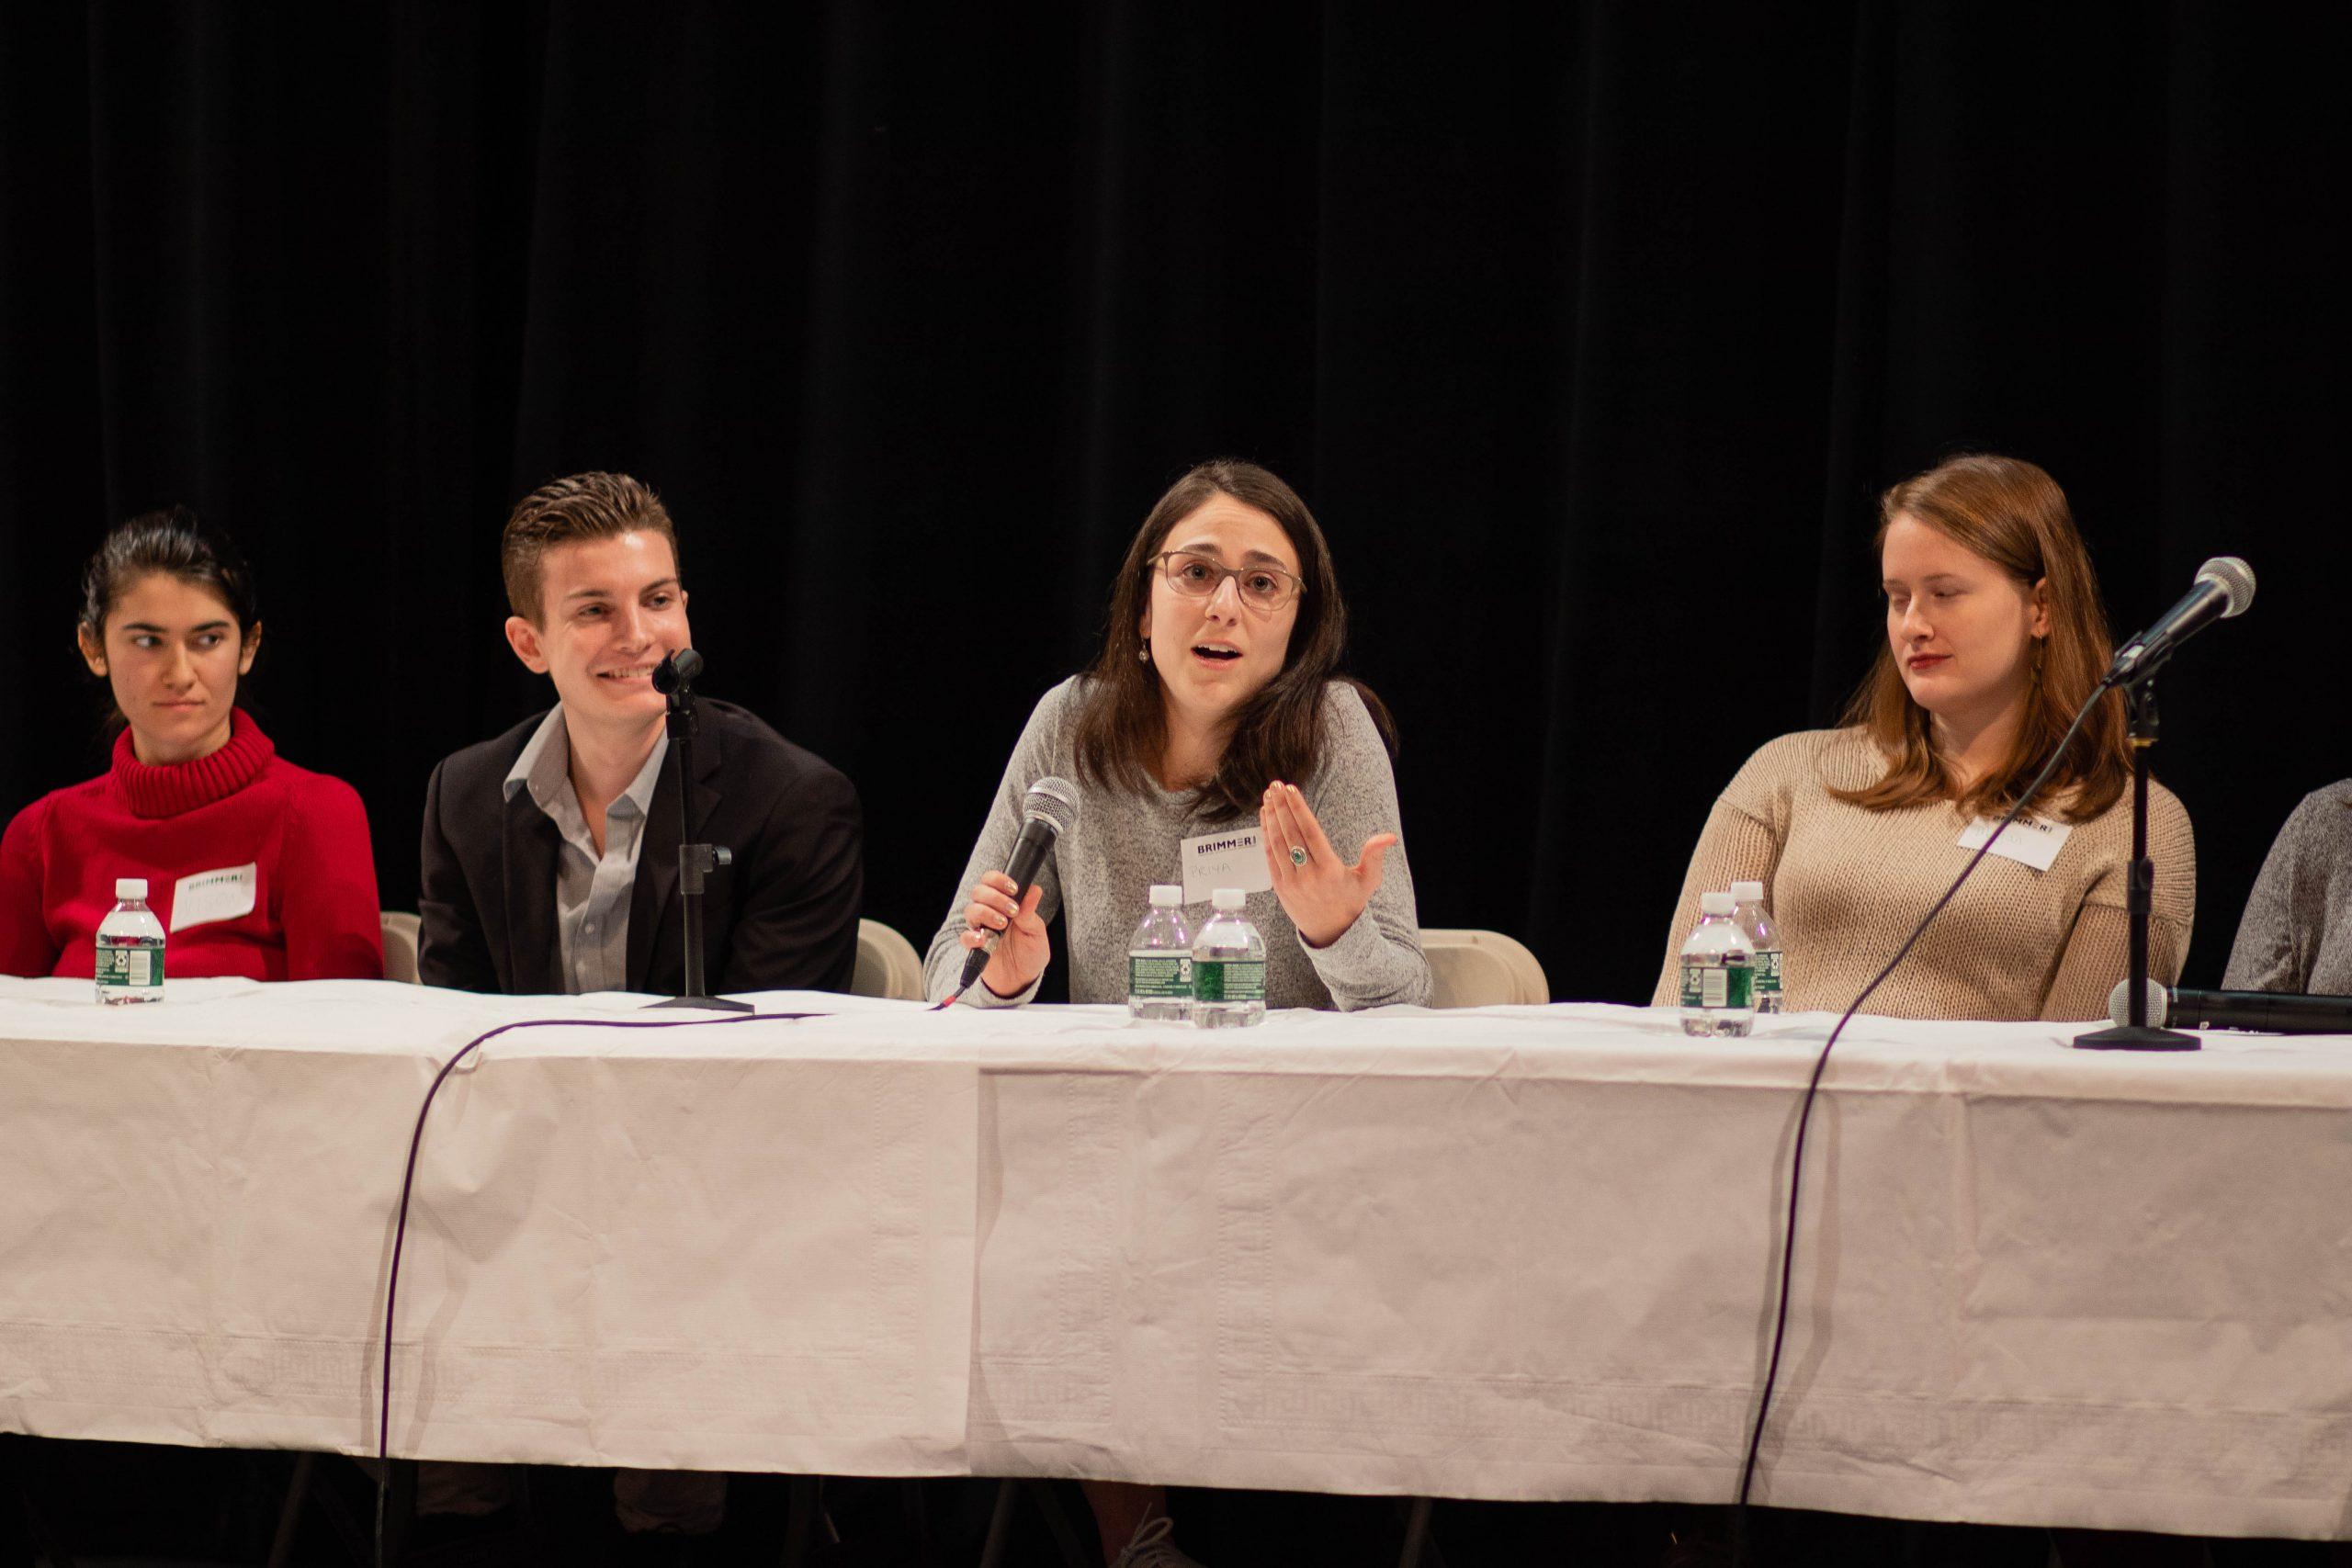 Alumni+spoke+on+a+panel+about+their+experiences+at+Brimmer.